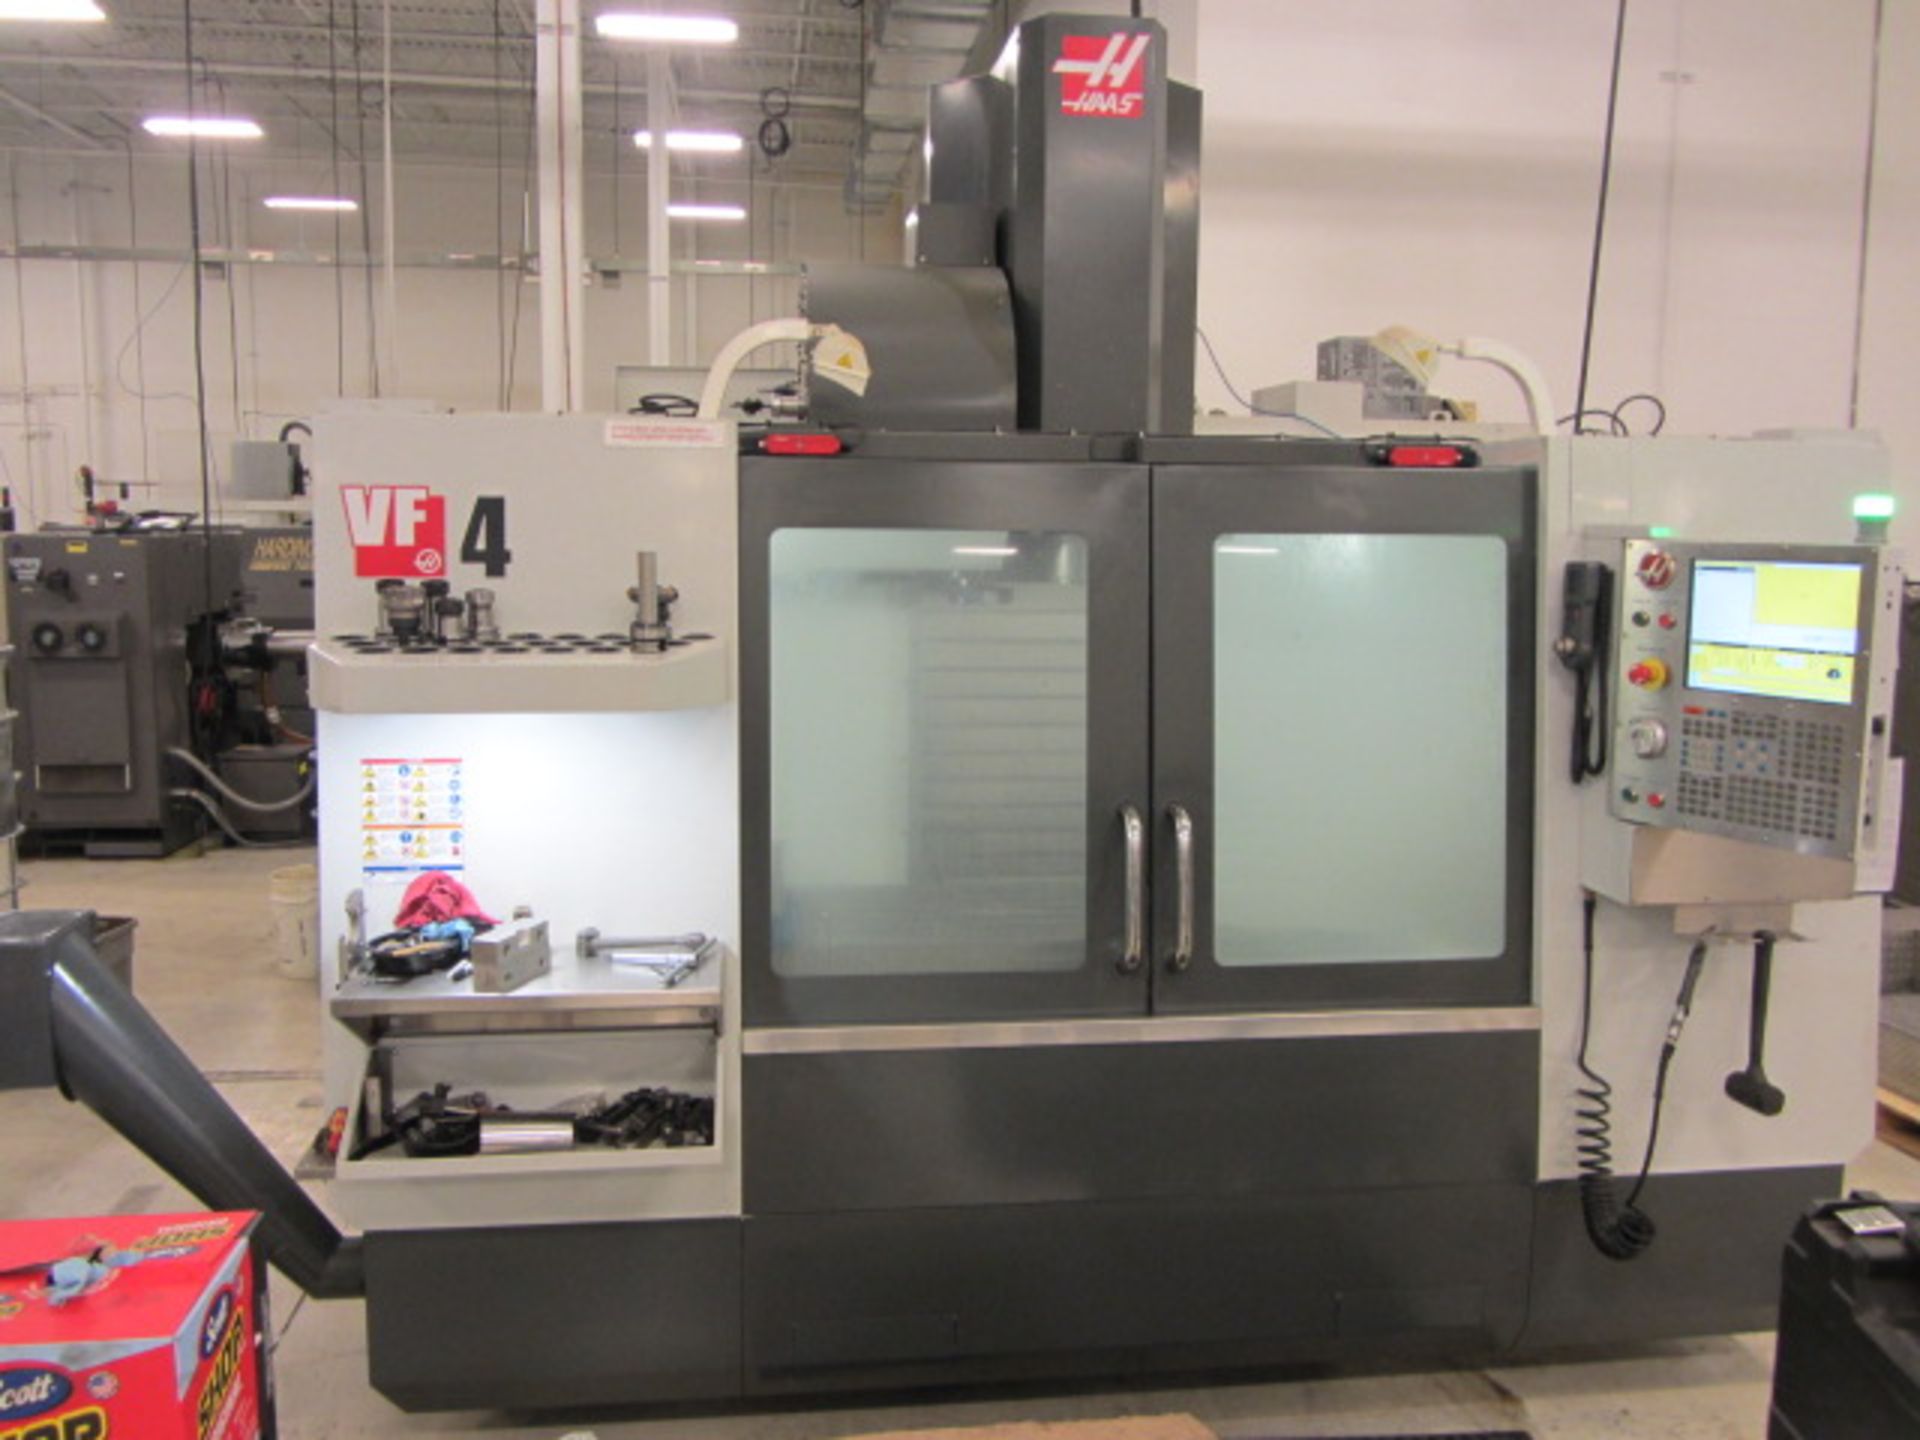 Haas VF-4 CNC Vertical Machining Center with 52'' x 18'' Table, #40 Taper Spindle Speeds to 8100